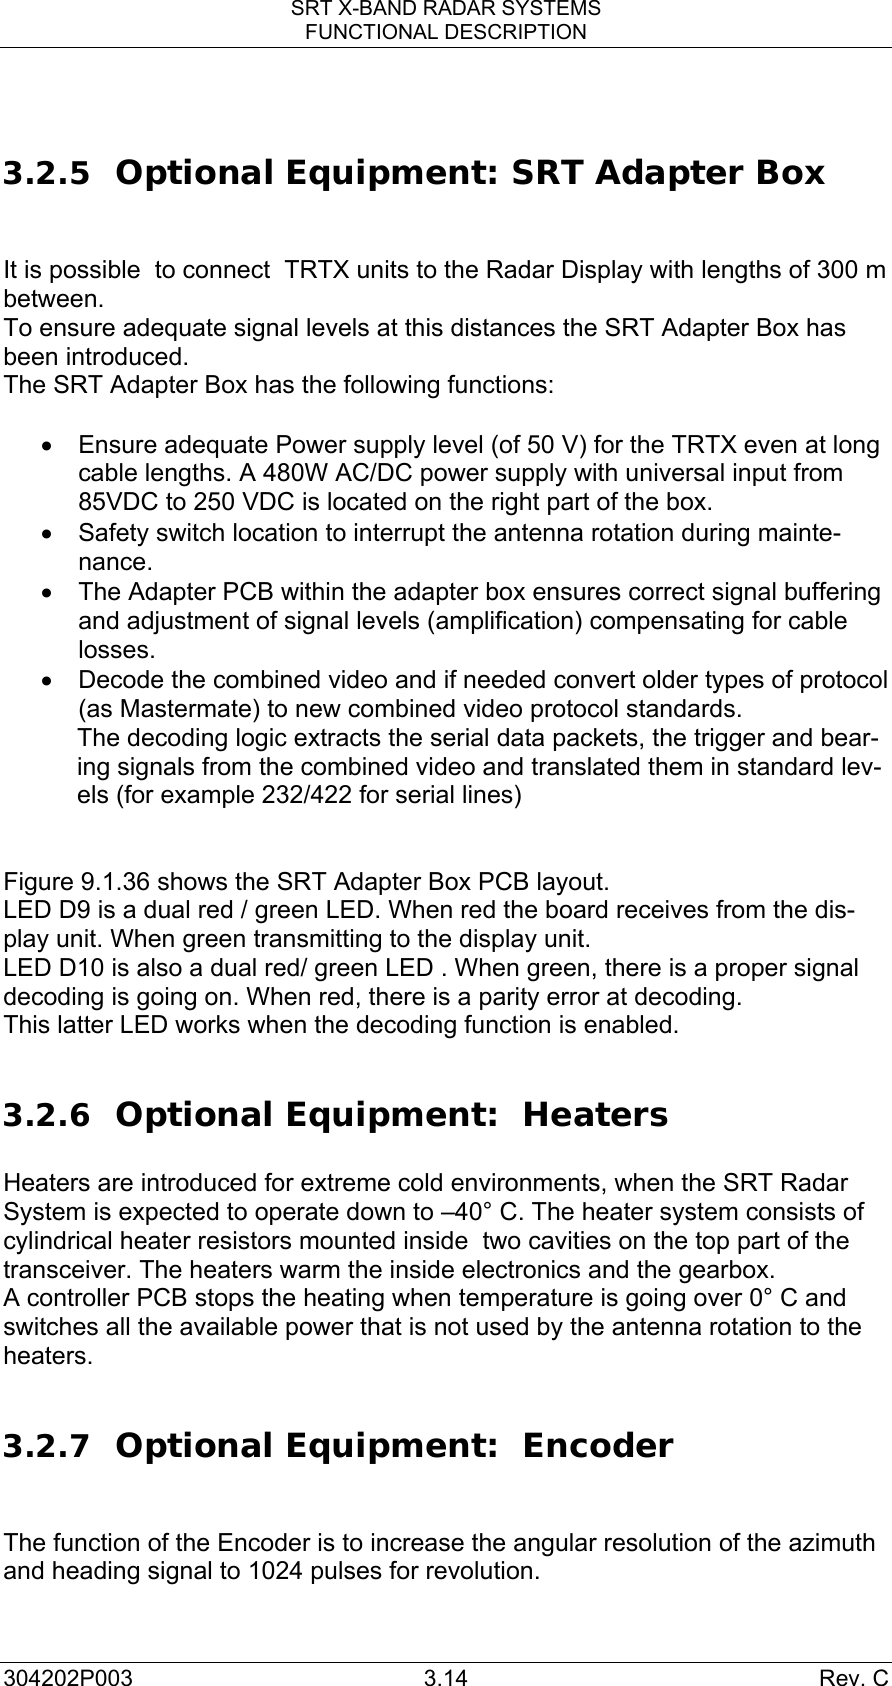 SRT X-BAND RADAR SYSTEMS FUNCTIONAL DESCRIPTION 304202P003 3.14  Rev. C  3.2.5 Optional Equipment: SRT Adapter Box   It is possible  to connect  TRTX units to the Radar Display with lengths of 300 m between.  To ensure adequate signal levels at this distances the SRT Adapter Box has been introduced.  The SRT Adapter Box has the following functions:   •  Ensure adequate Power supply level (of 50 V) for the TRTX even at long cable lengths. A 480W AC/DC power supply with universal input from 85VDC to 250 VDC is located on the right part of the box. •  Safety switch location to interrupt the antenna rotation during mainte-nance. •  The Adapter PCB within the adapter box ensures correct signal buffering and adjustment of signal levels (amplification) compensating for cable losses. •  Decode the combined video and if needed convert older types of protocol (as Mastermate) to new combined video protocol standards. The decoding logic extracts the serial data packets, the trigger and bear-ing signals from the combined video and translated them in standard lev-els (for example 232/422 for serial lines)   Figure 9.1.36 shows the SRT Adapter Box PCB layout.  LED D9 is a dual red / green LED. When red the board receives from the dis-play unit. When green transmitting to the display unit. LED D10 is also a dual red/ green LED . When green, there is a proper signal decoding is going on. When red, there is a parity error at decoding. This latter LED works when the decoding function is enabled.  3.2.6 Optional Equipment:  Heaters  Heaters are introduced for extreme cold environments, when the SRT Radar System is expected to operate down to –40° C. The heater system consists of cylindrical heater resistors mounted inside  two cavities on the top part of the transceiver. The heaters warm the inside electronics and the gearbox. A controller PCB stops the heating when temperature is going over 0° C and switches all the available power that is not used by the antenna rotation to the heaters.    3.2.7 Optional Equipment:  Encoder   The function of the Encoder is to increase the angular resolution of the azimuth and heading signal to 1024 pulses for revolution.